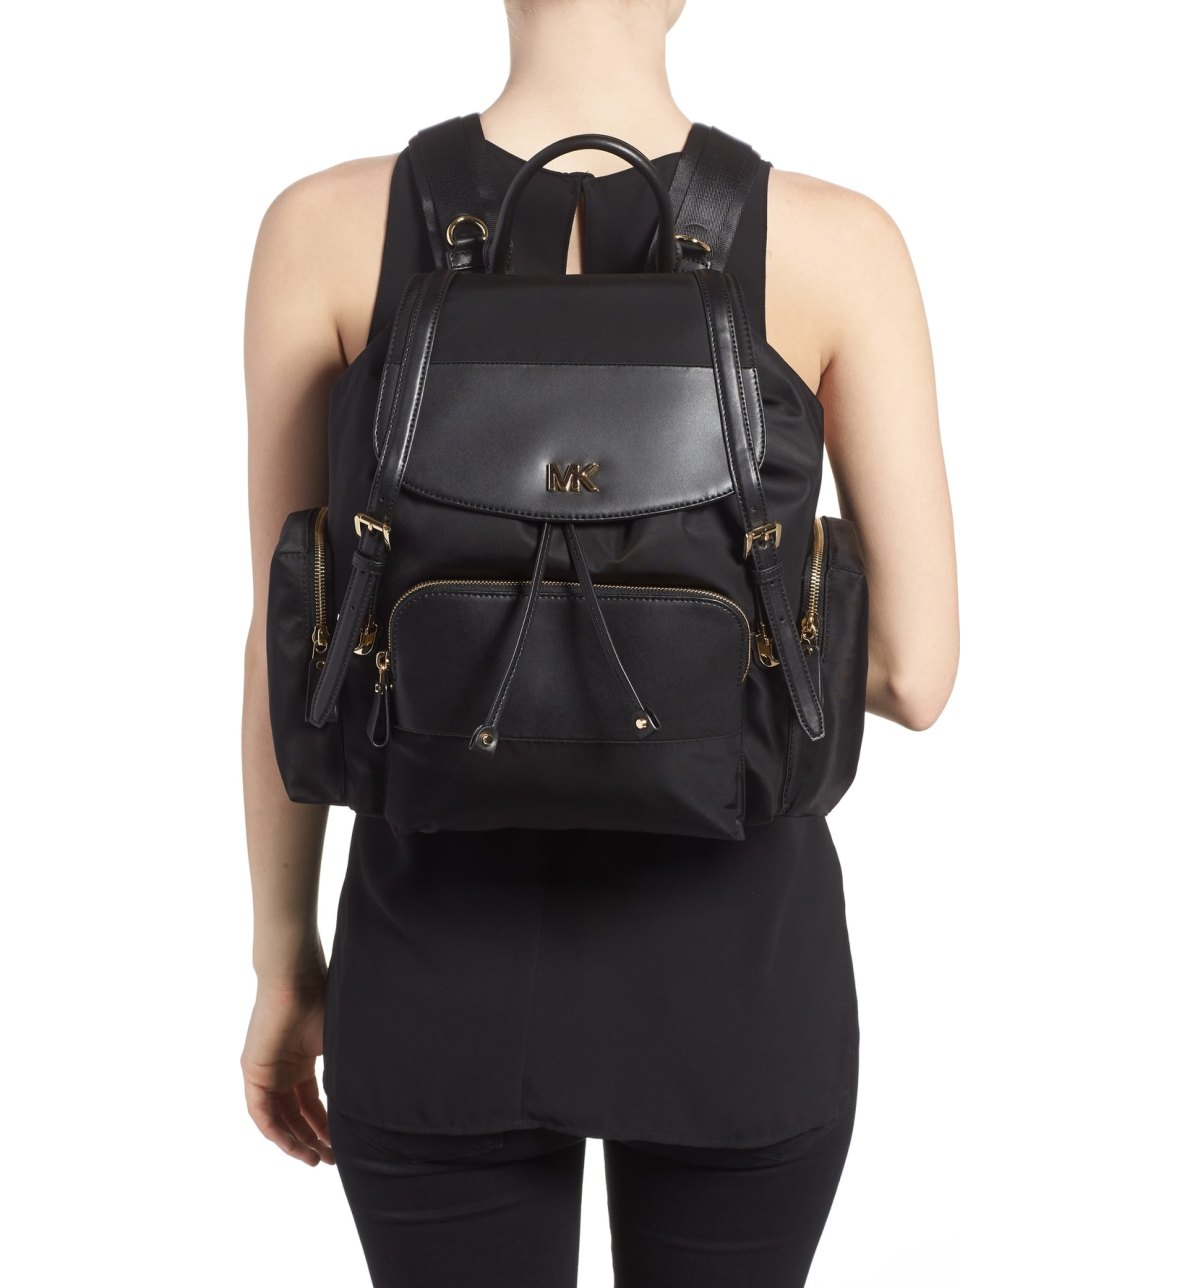 diario abolir Lechuguilla This Michael Kors Backpack Is Actually a Stylish Diaper Bag